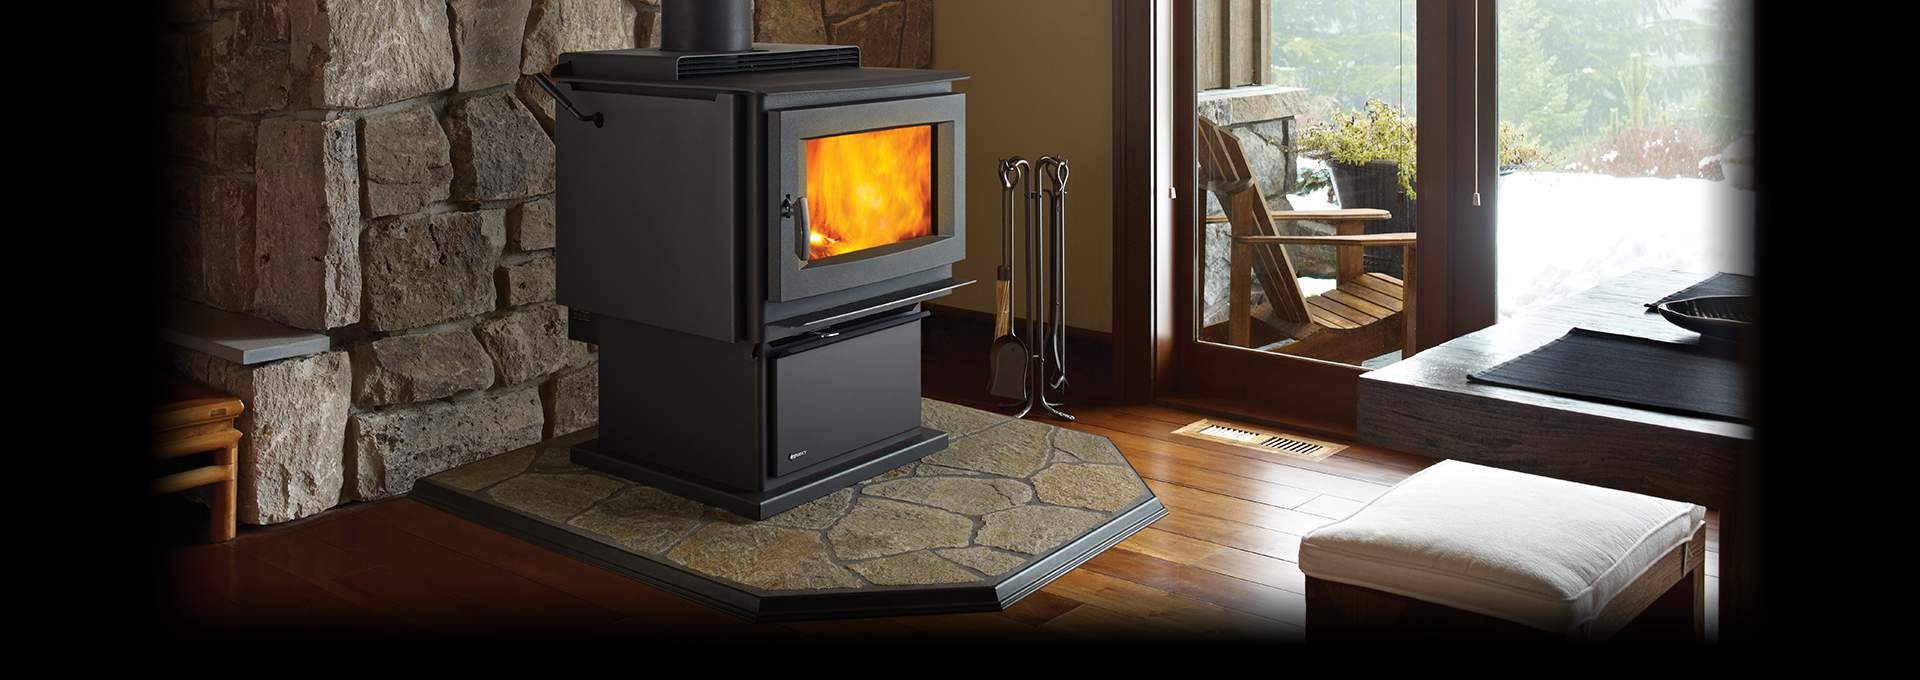 hardwood floor fireplace transition of wood burning stoves regency fireplace products inside regency pro series feature video